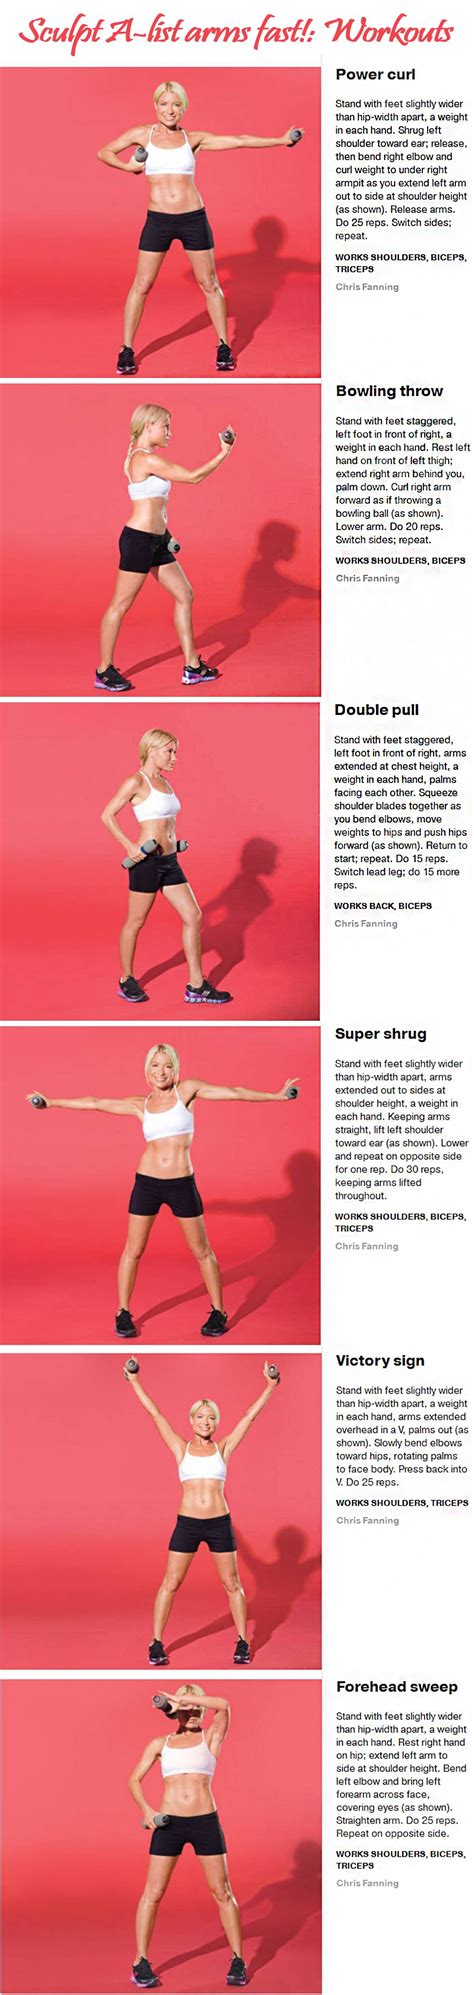 Pin by Kristi Christy on Healthy eating | Fitness body, Tracy anderson workout, Exercise